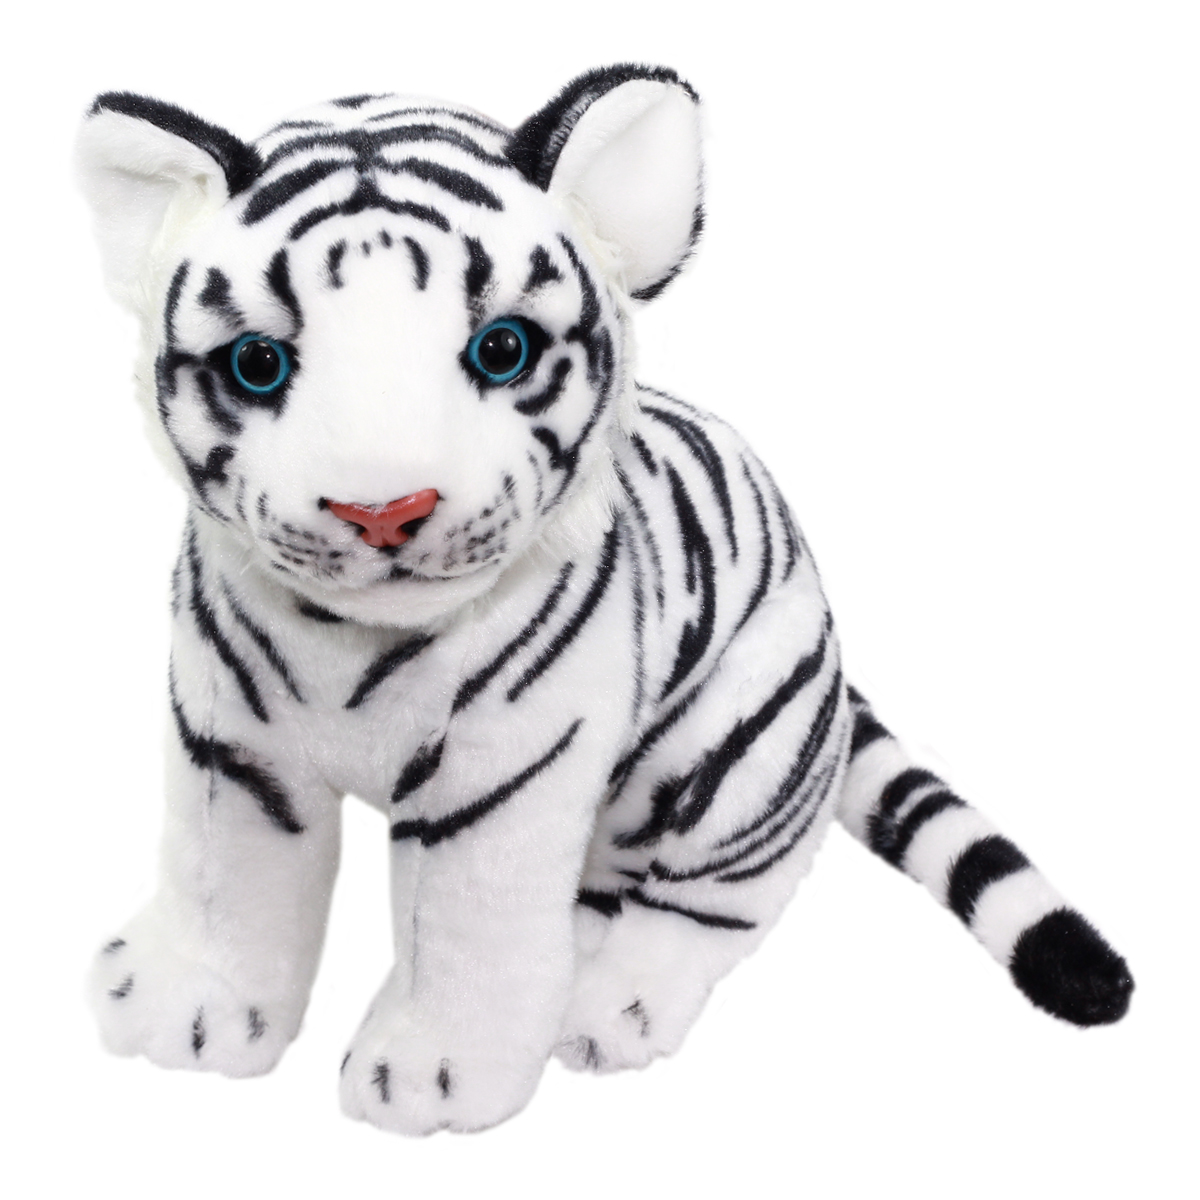 Real Animal Plush Collection Stuffed Animal Toy White Tiger 10 Inches